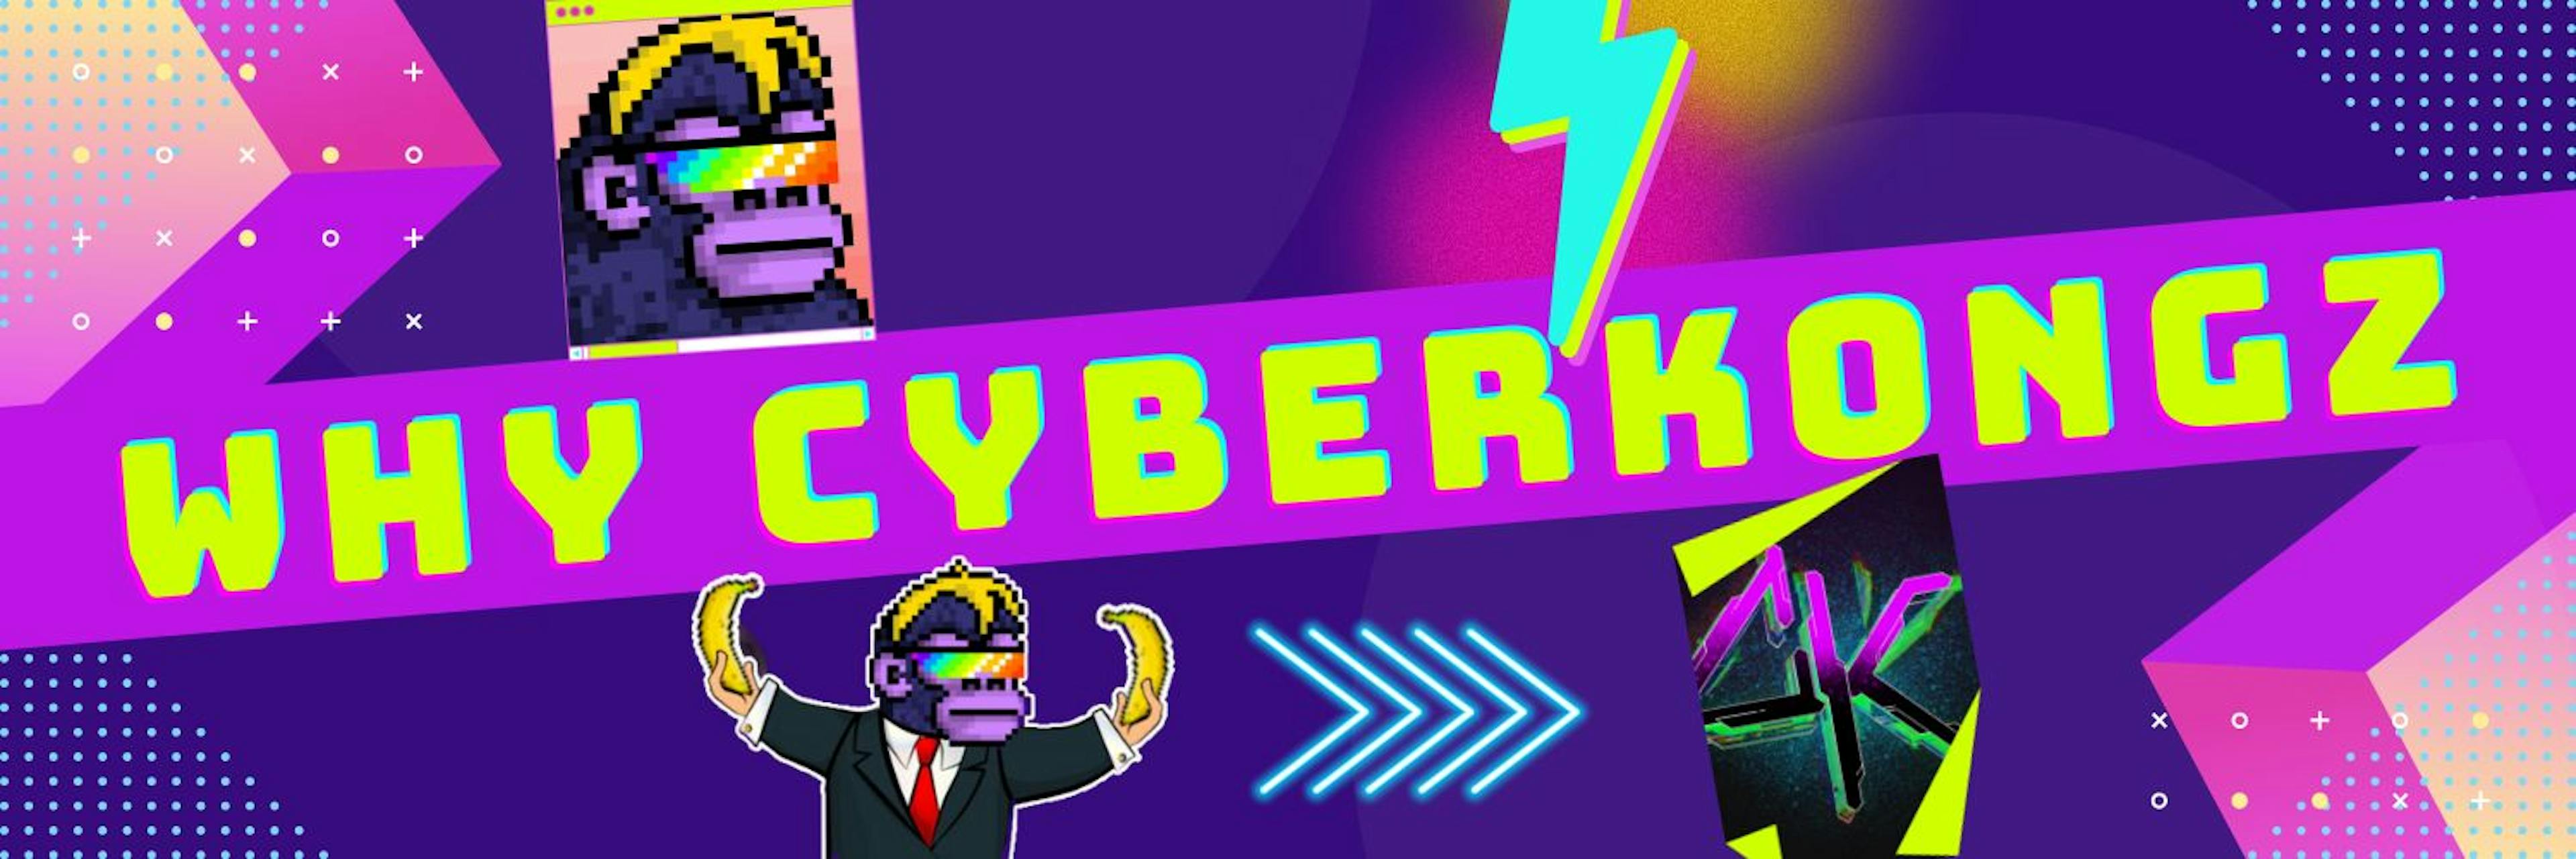 featured image - Why CyberKongz is the Most Undervalued Metaverse Play Right Now